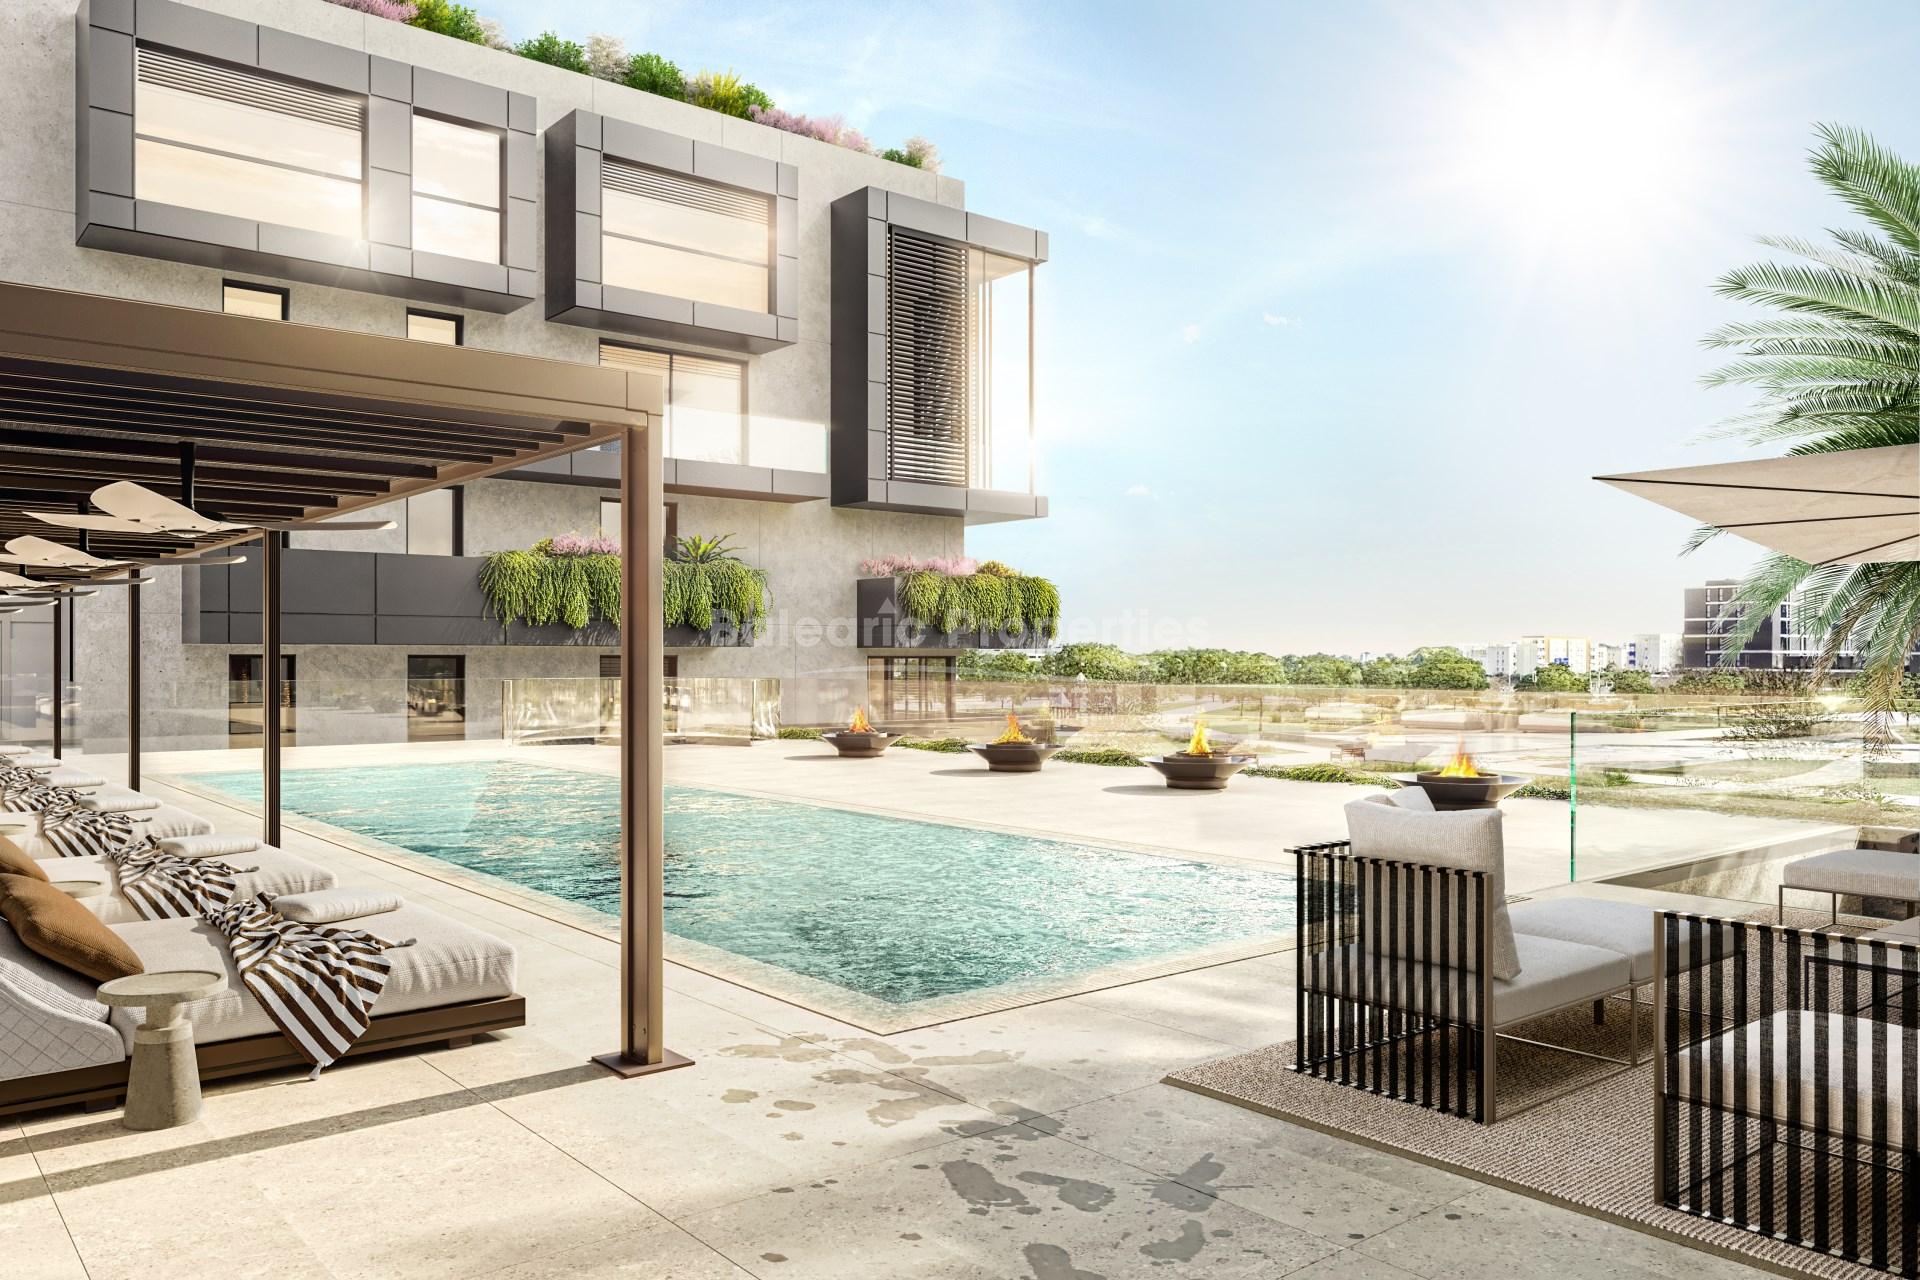 New development of Apartments and Penthouses for sale in Palma, Mallorca